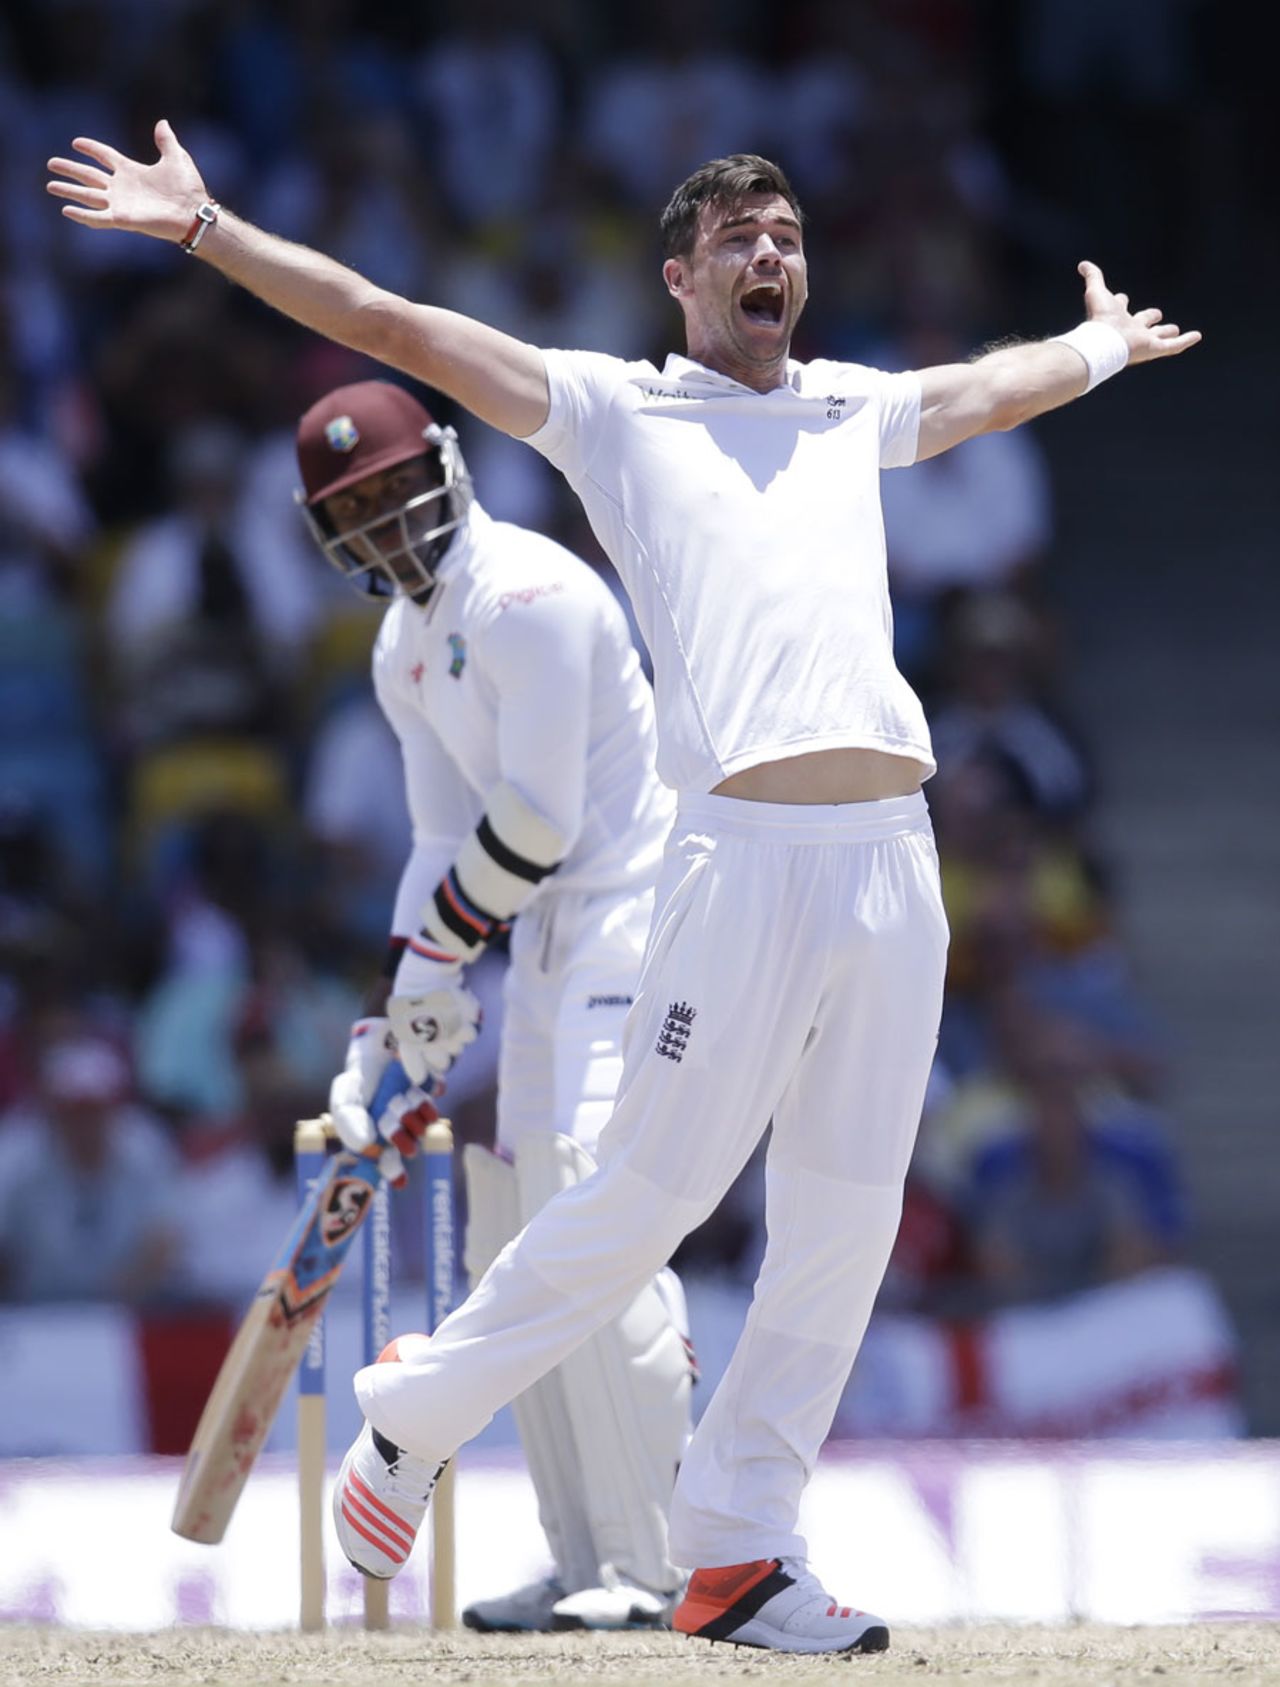 James Anderson appeals successfully for the wicket of Marlon Samuels, West Indies v England, 3rd Test, Bridgetown, 2nd day, May 2, 2015